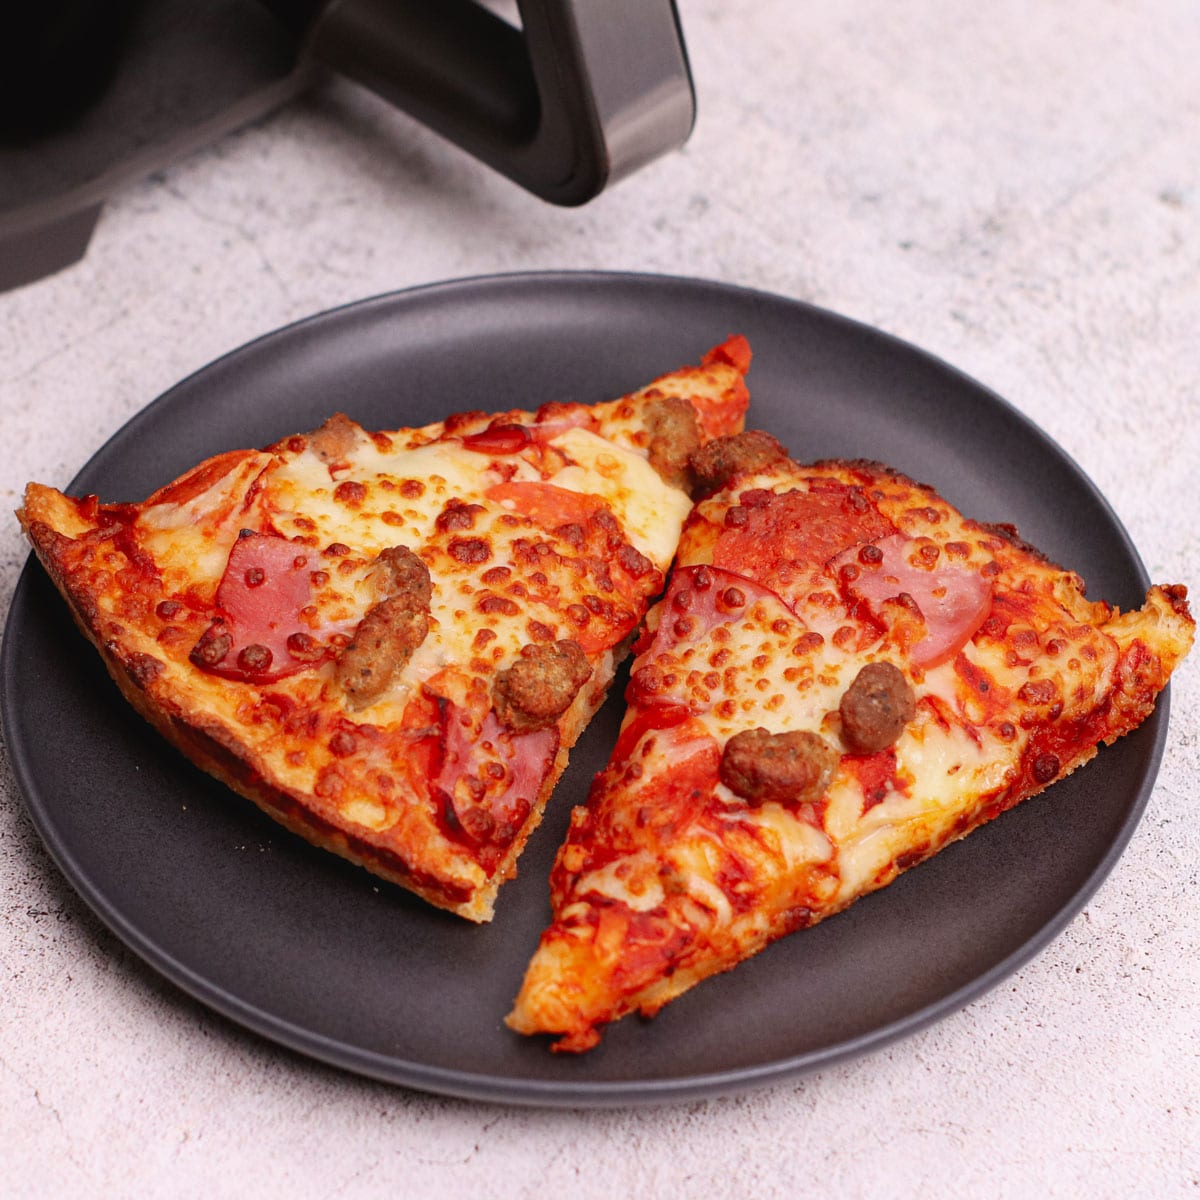 Reheated pizza slices in a black plate